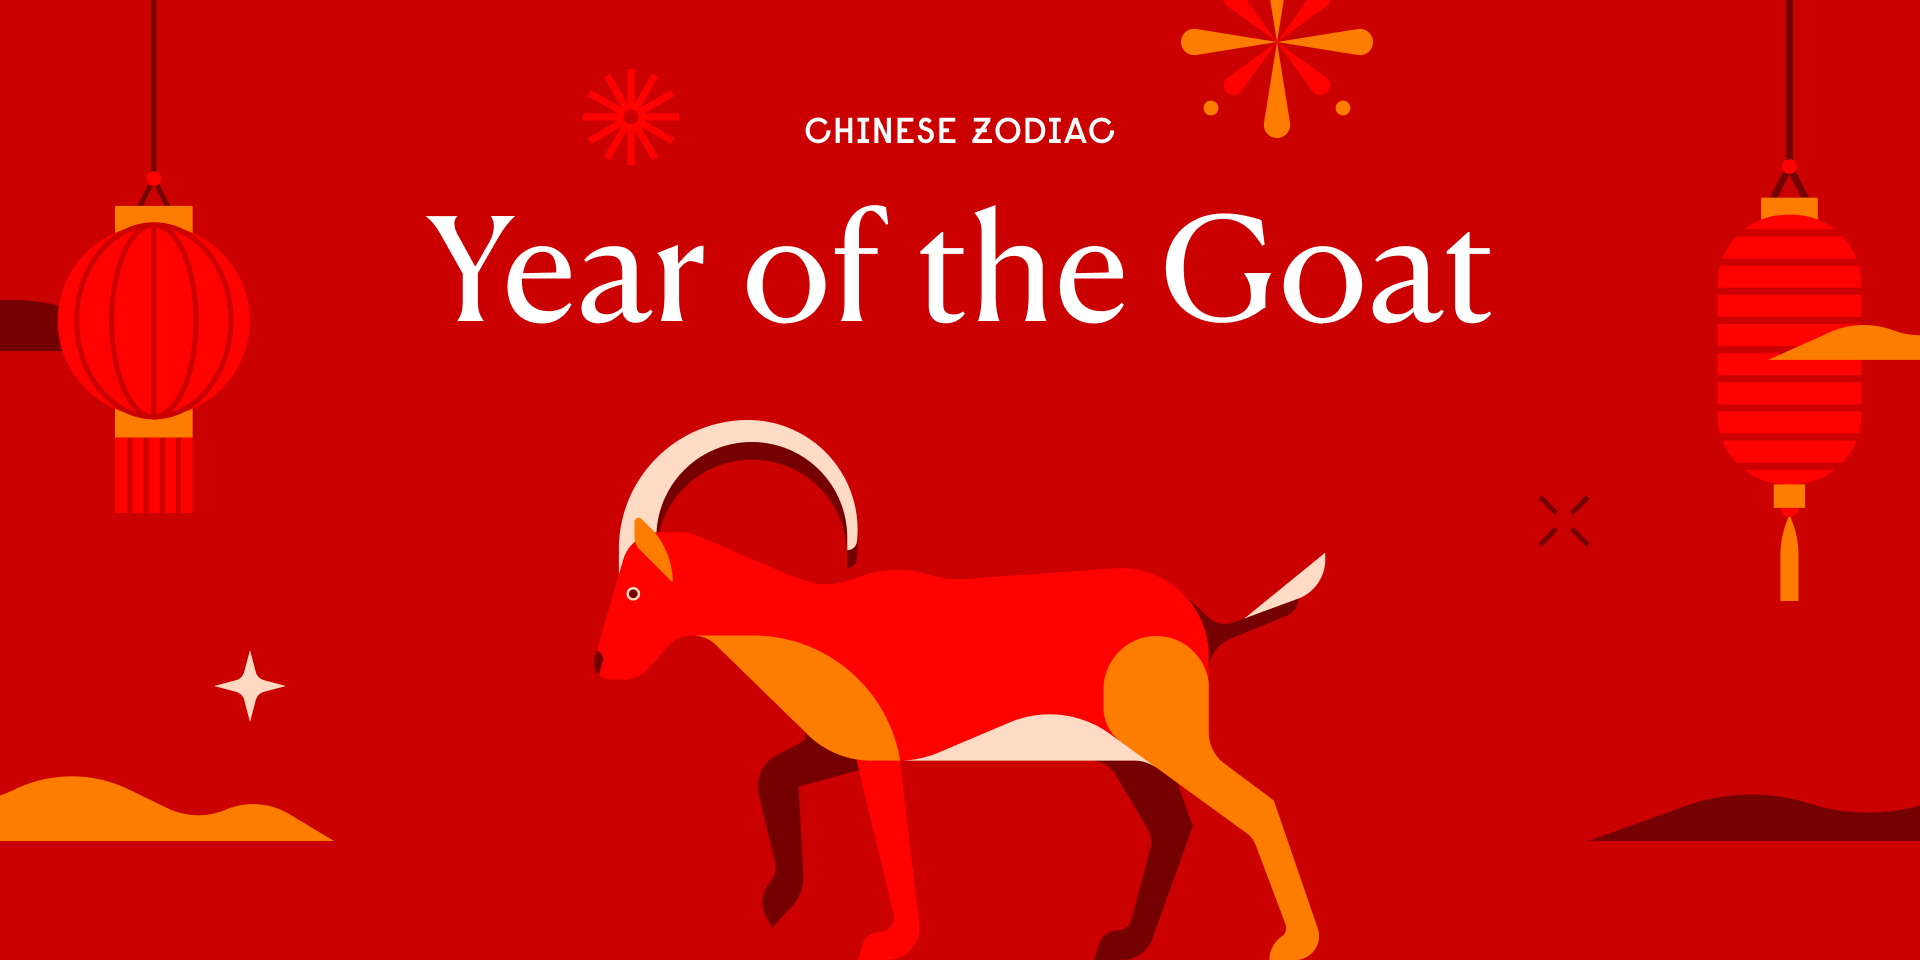 2021 Horoscope Predictions for Those Born in the Year of Goat